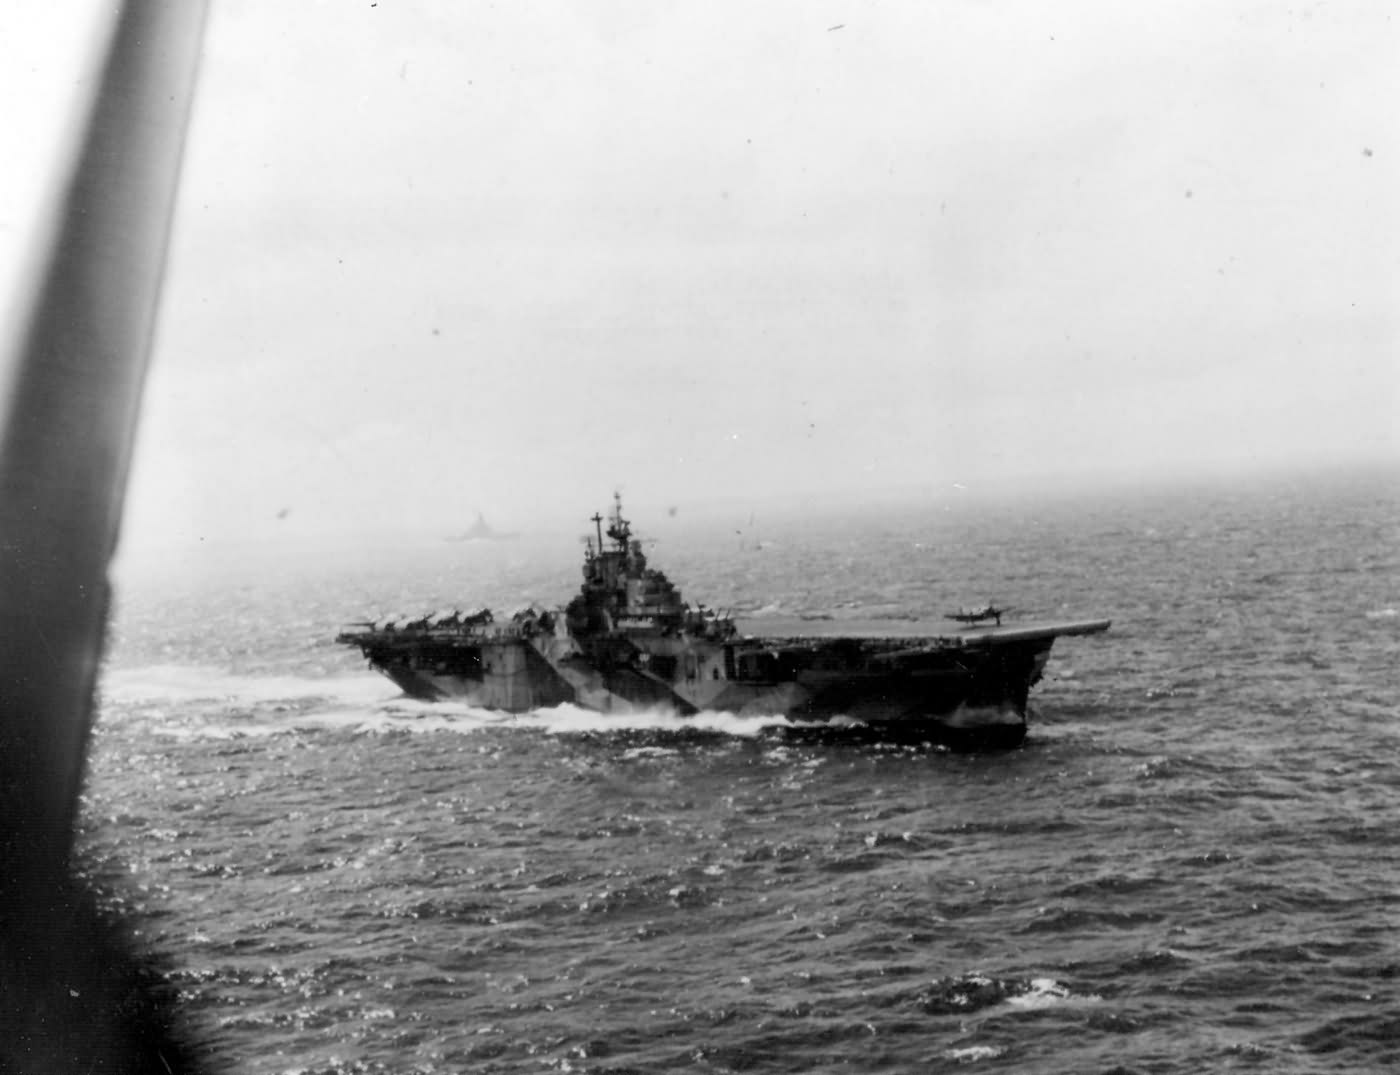 USS Intrepid (CV-11) during the Battle of Leyte Gulf